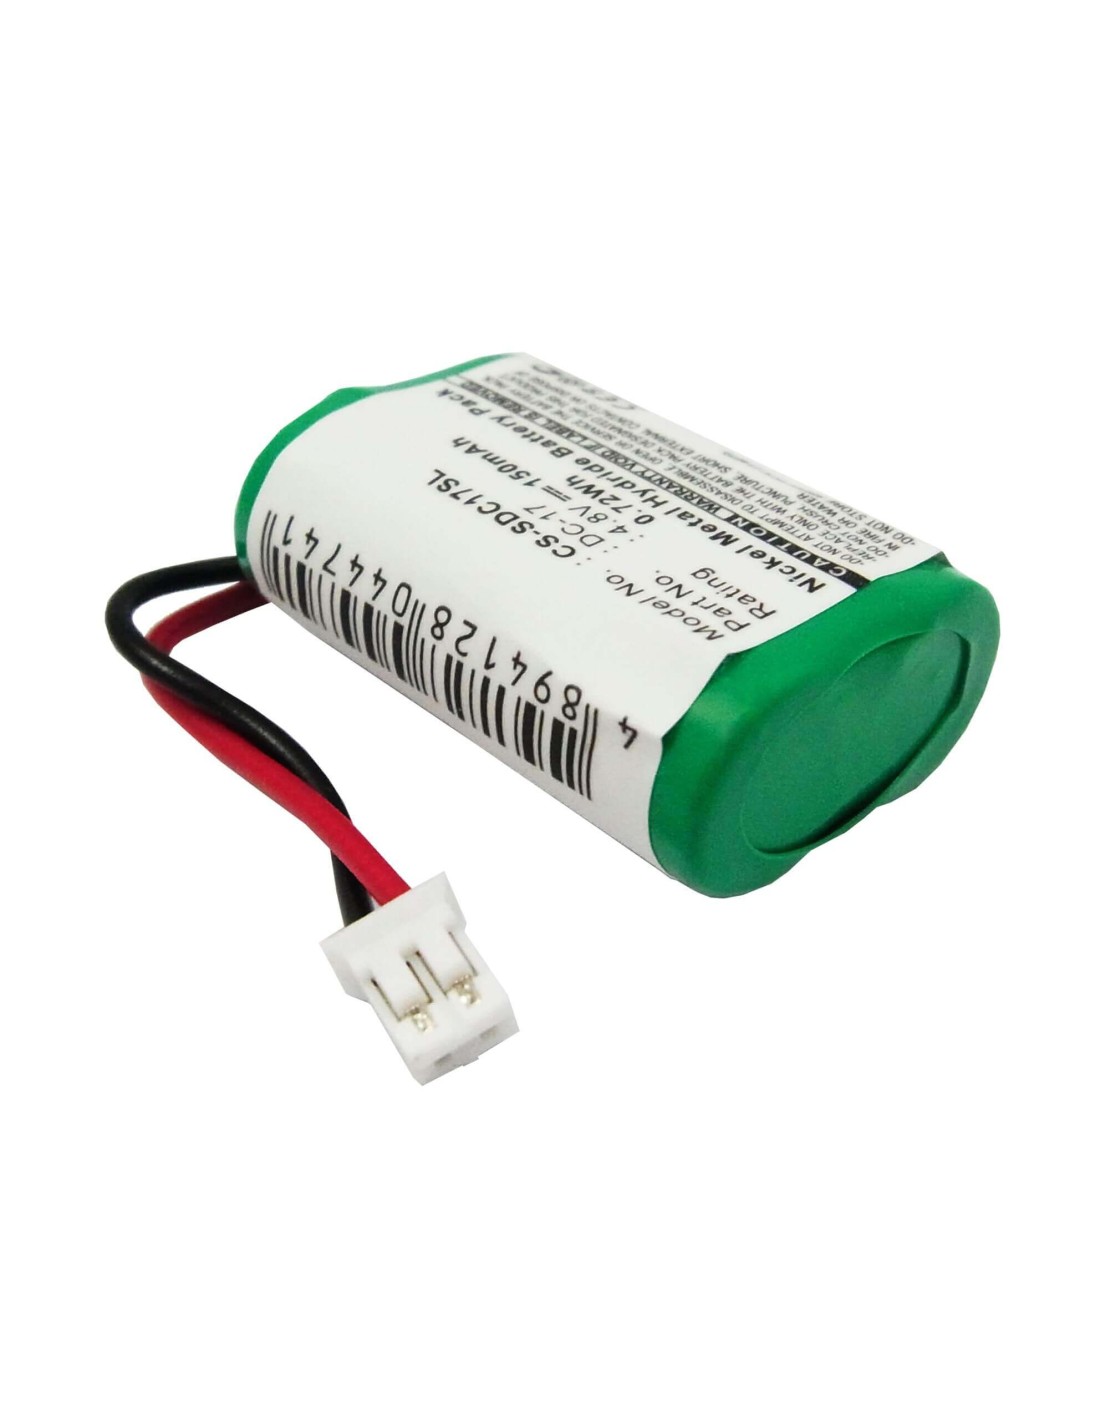 Battery for Kinetic Mh120aaal4gc 4.8V, 150mAh - 0.72Wh